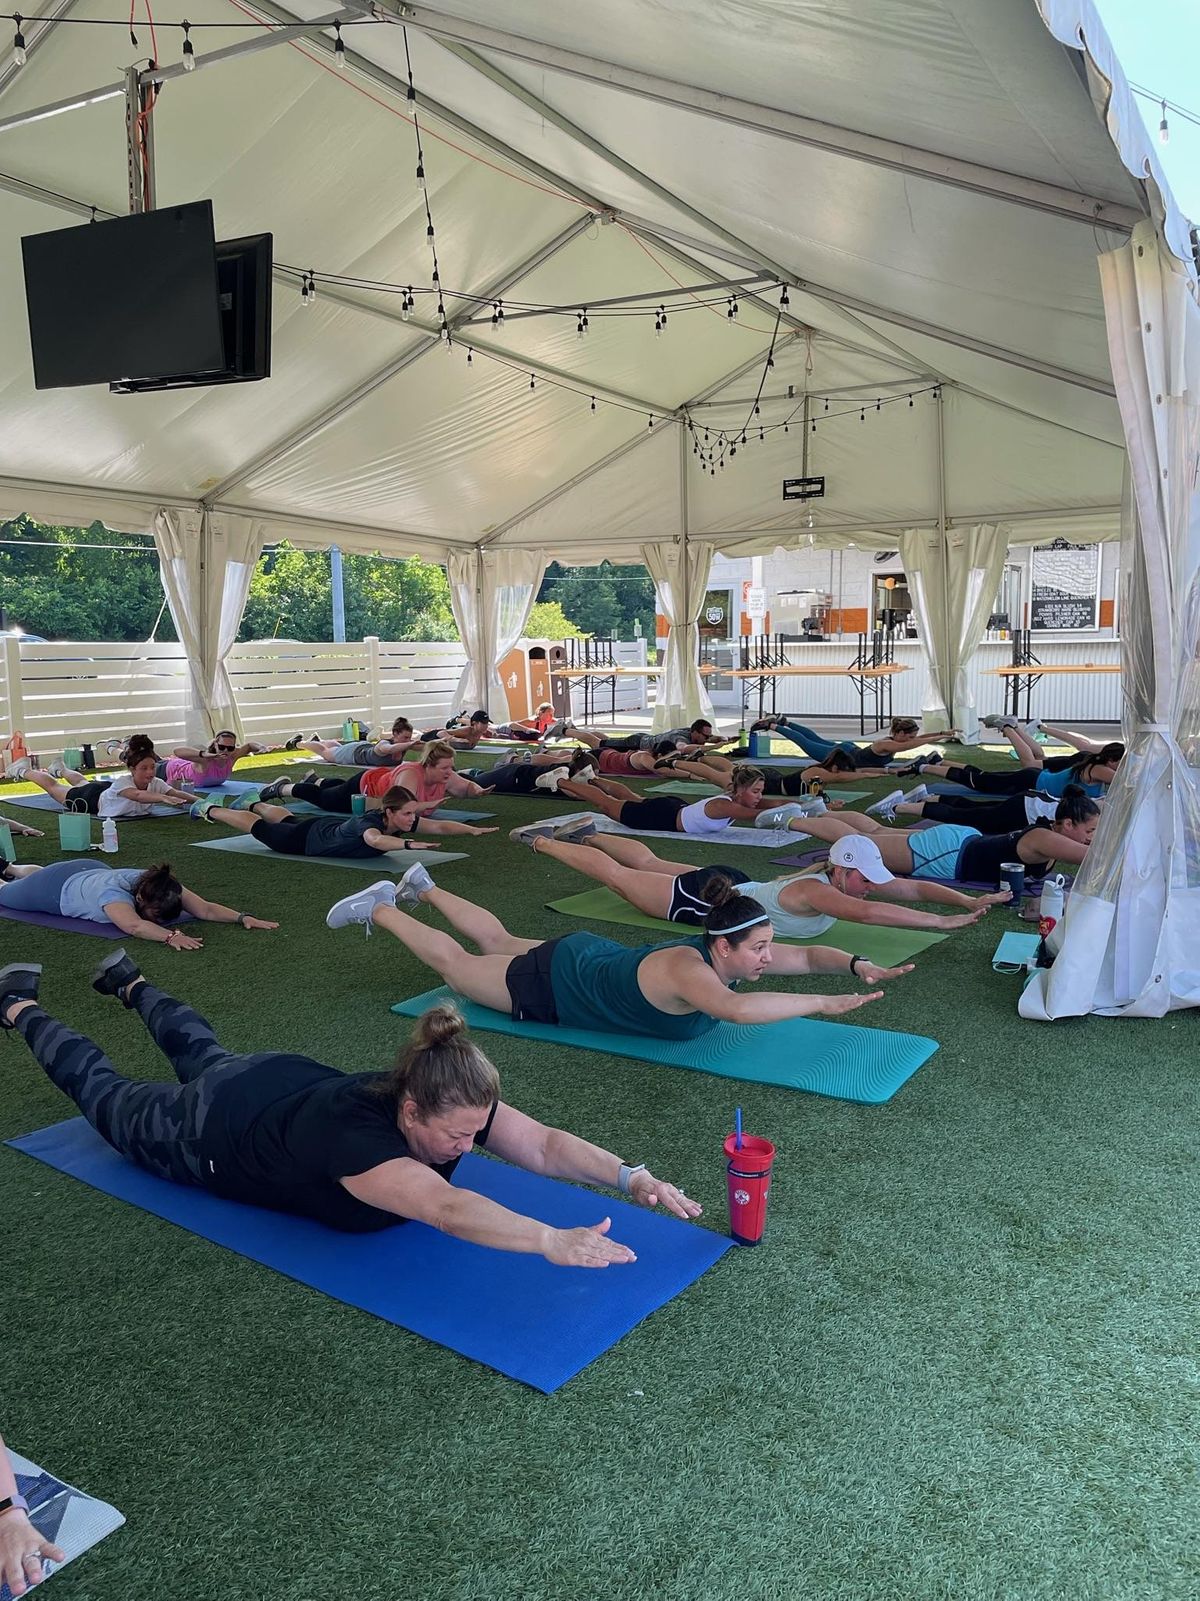 HEALTHCARE HERO APPRECIATION: Sunday Funday Workout at Fifty West Brewing